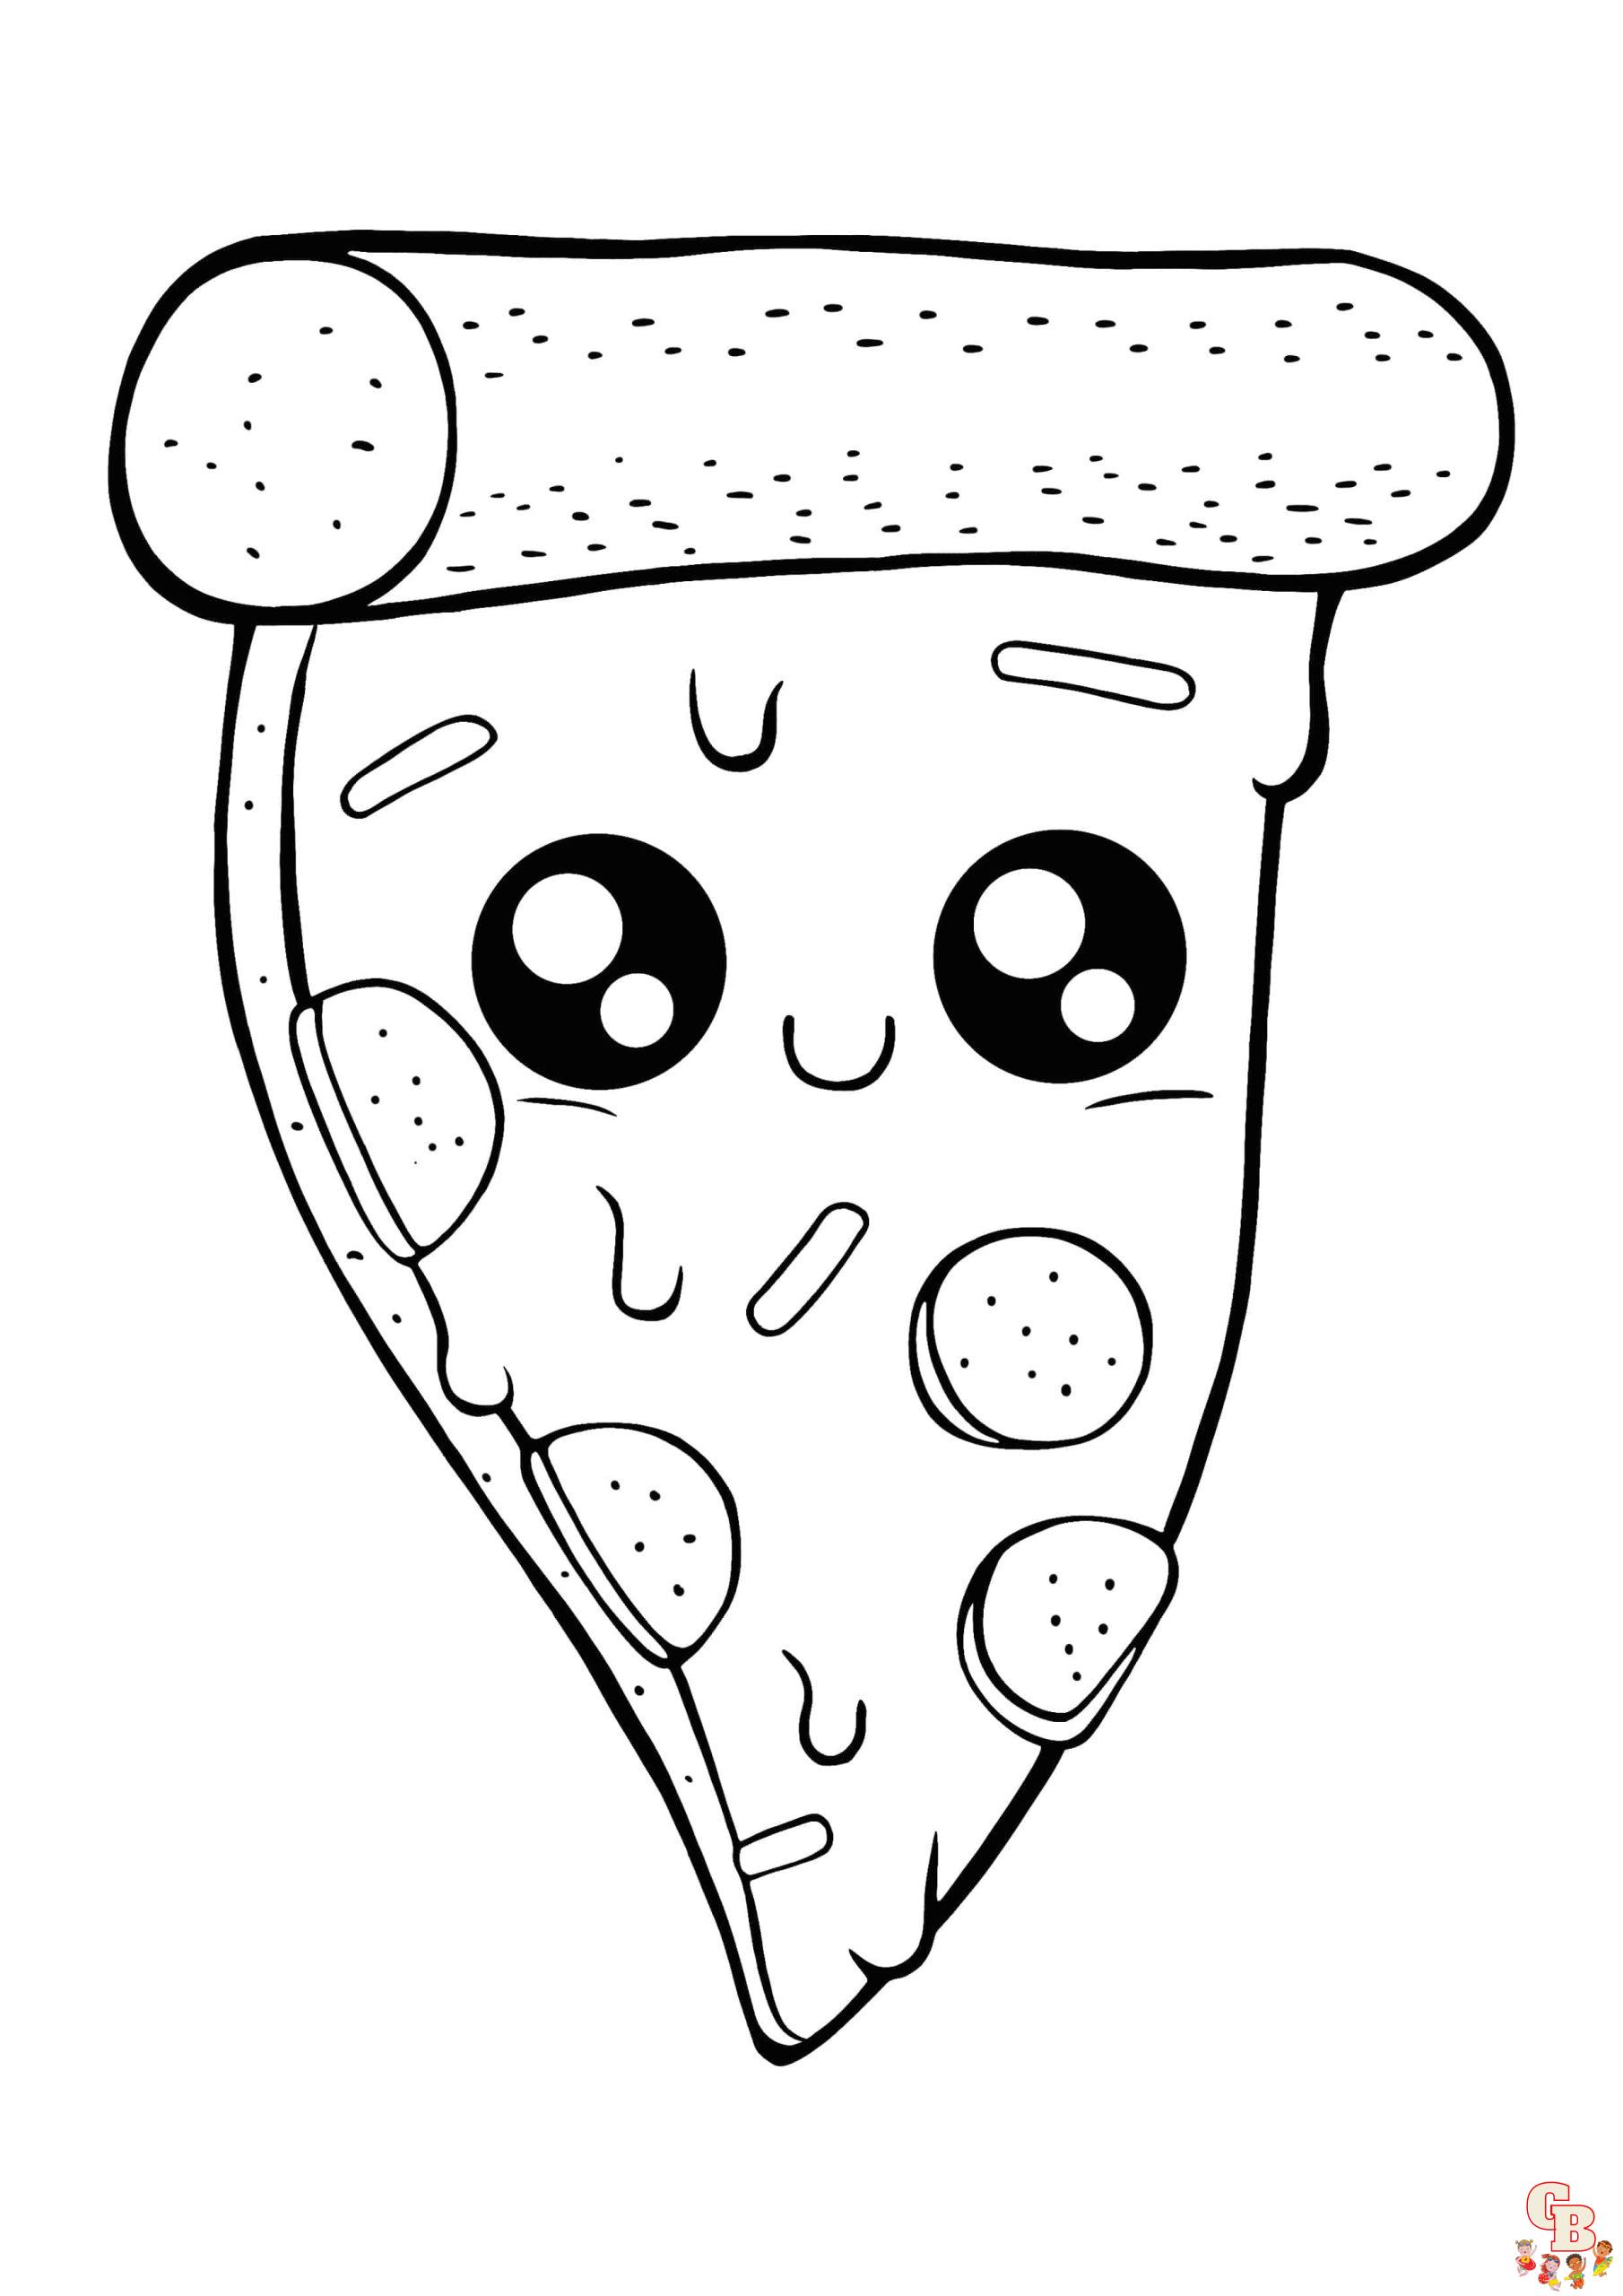 discover-fun-and-creative-pizza-coloring-pages-for-kids-gbcoloring